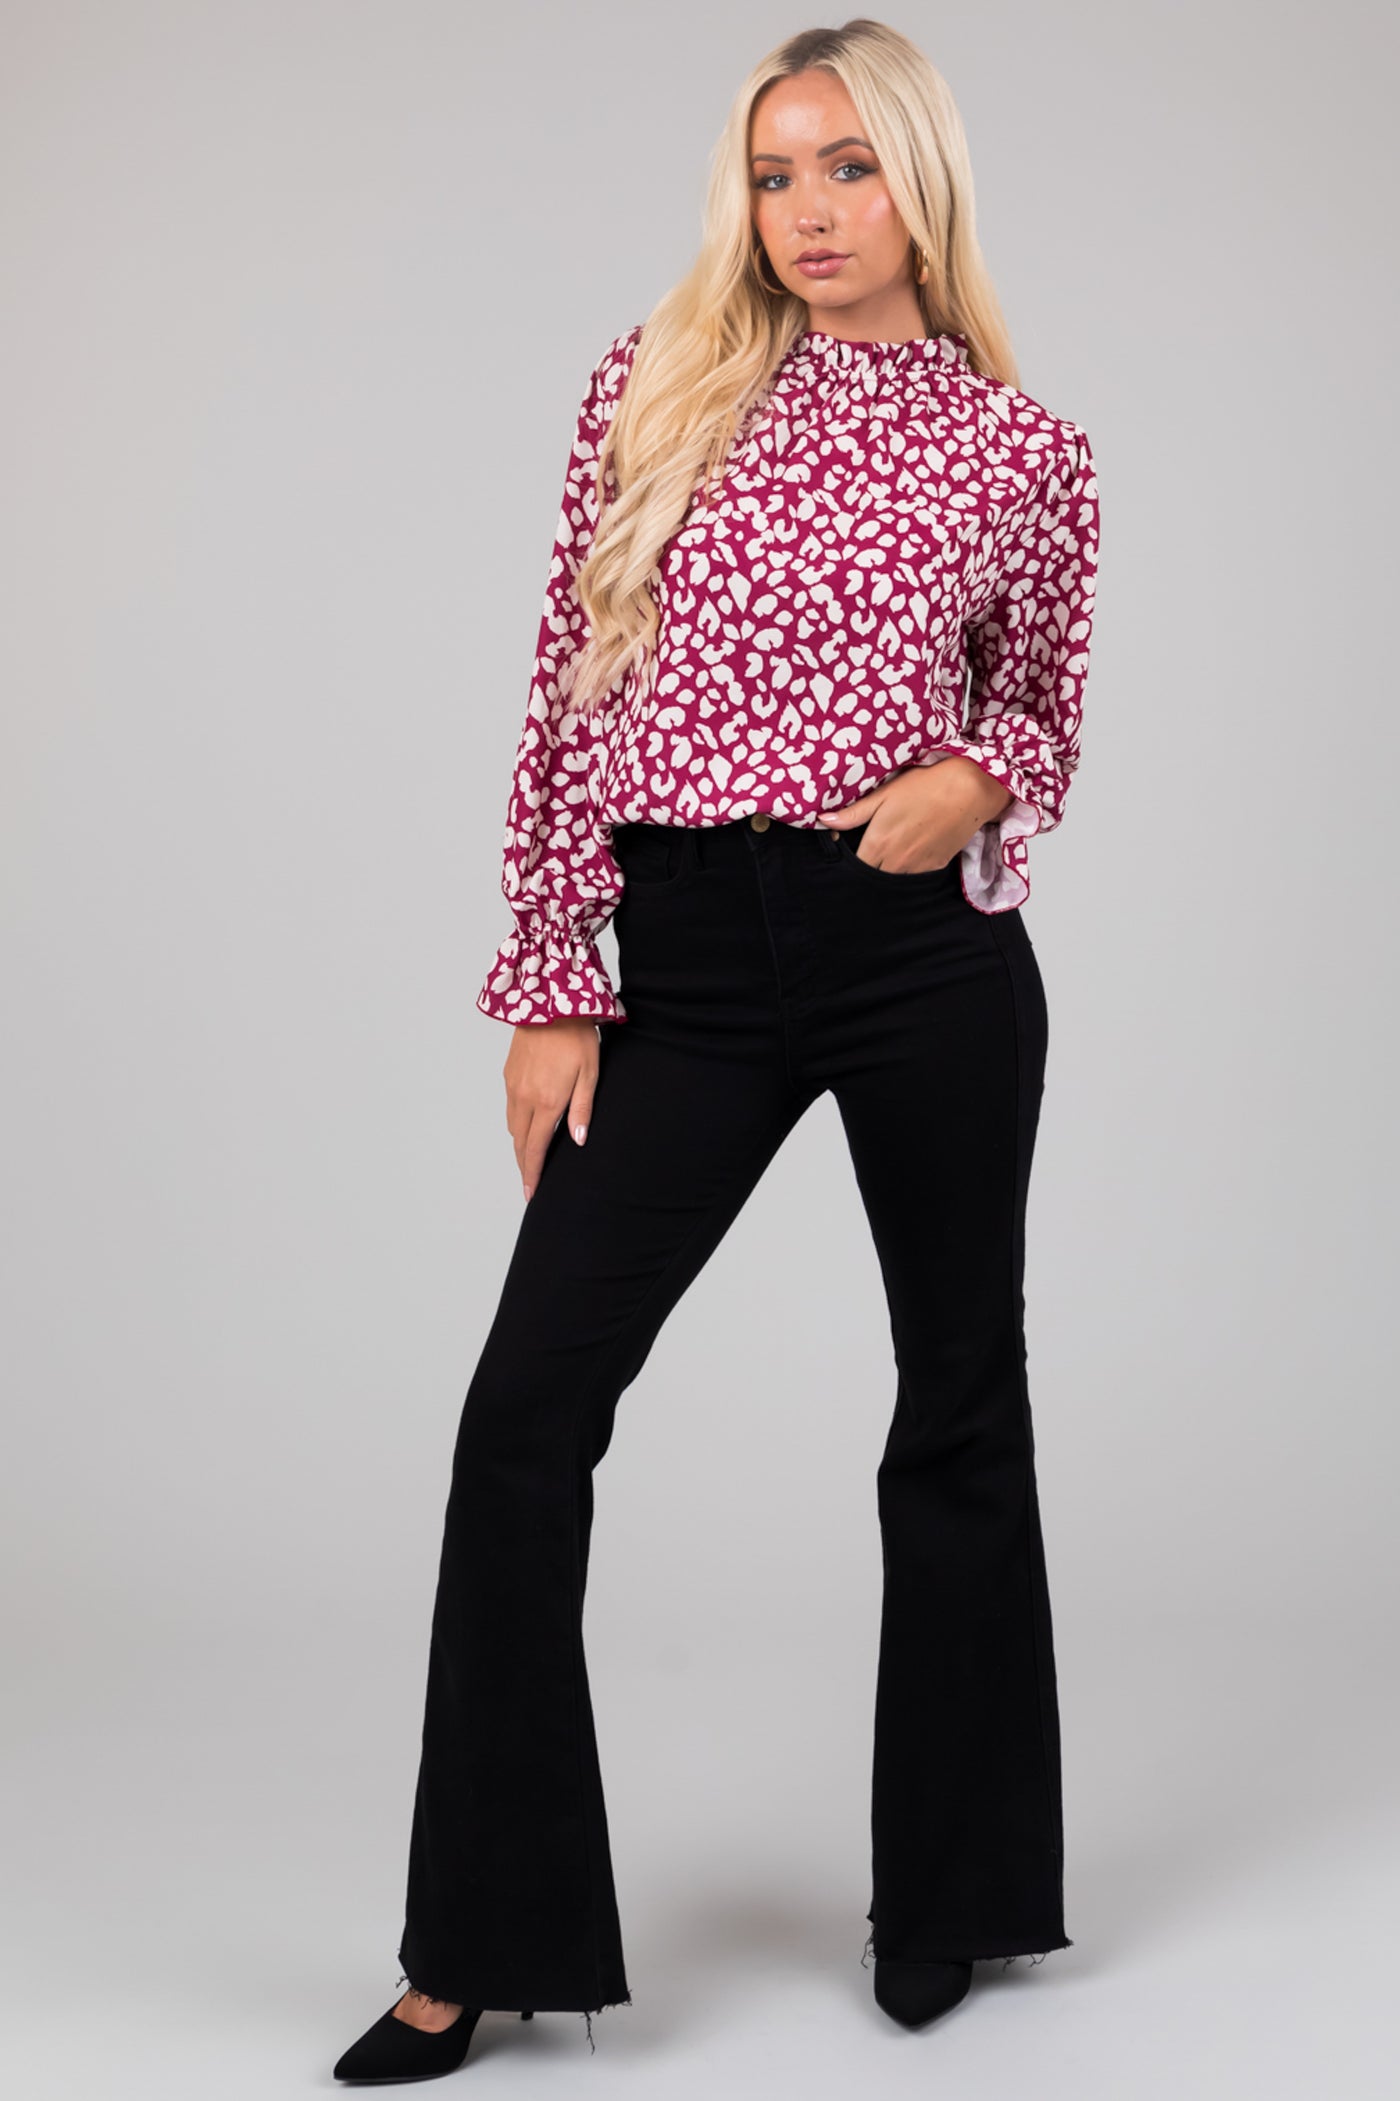 Hibiscus and Ivory Leopard Print Ruffle Top